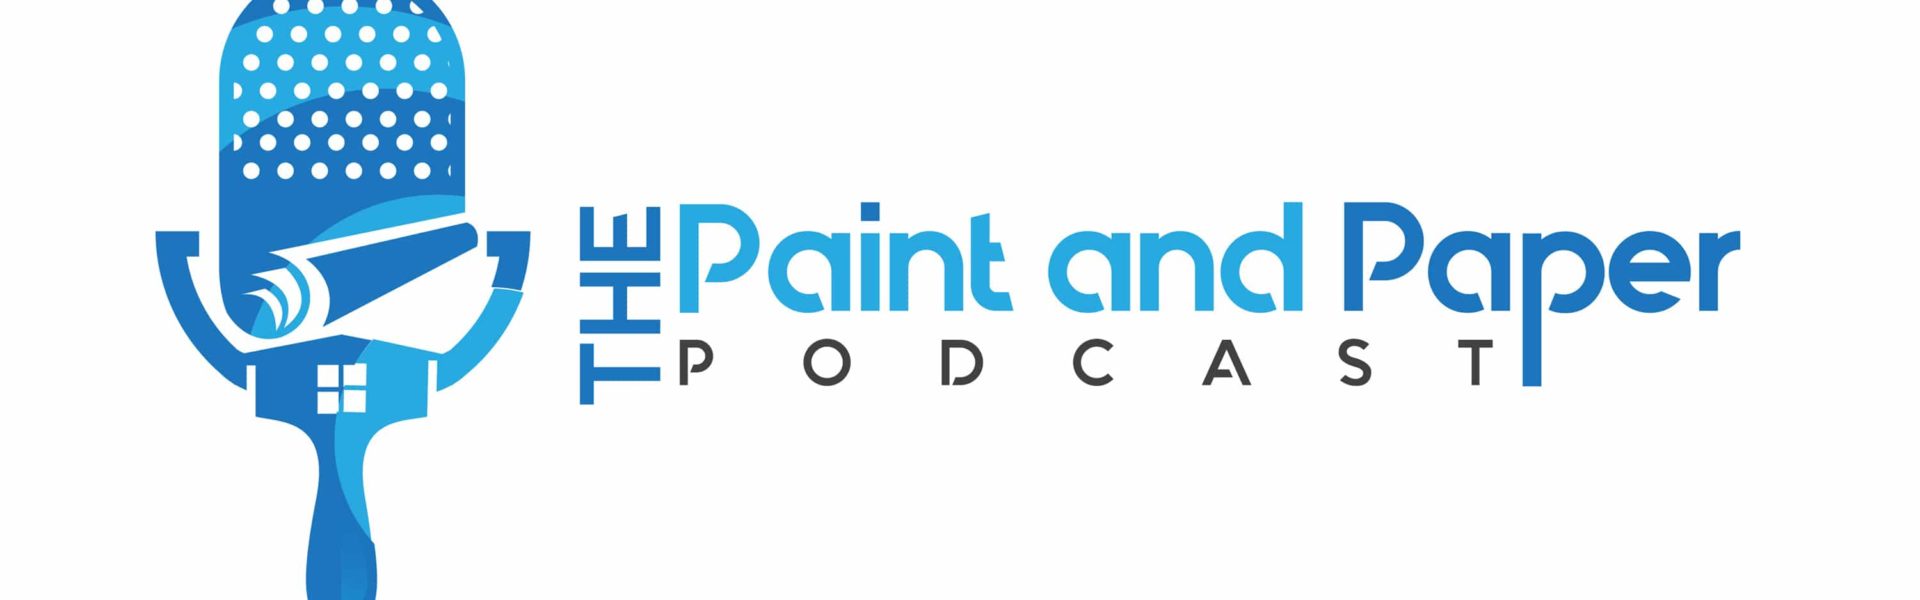 Paint and Paper Podcast